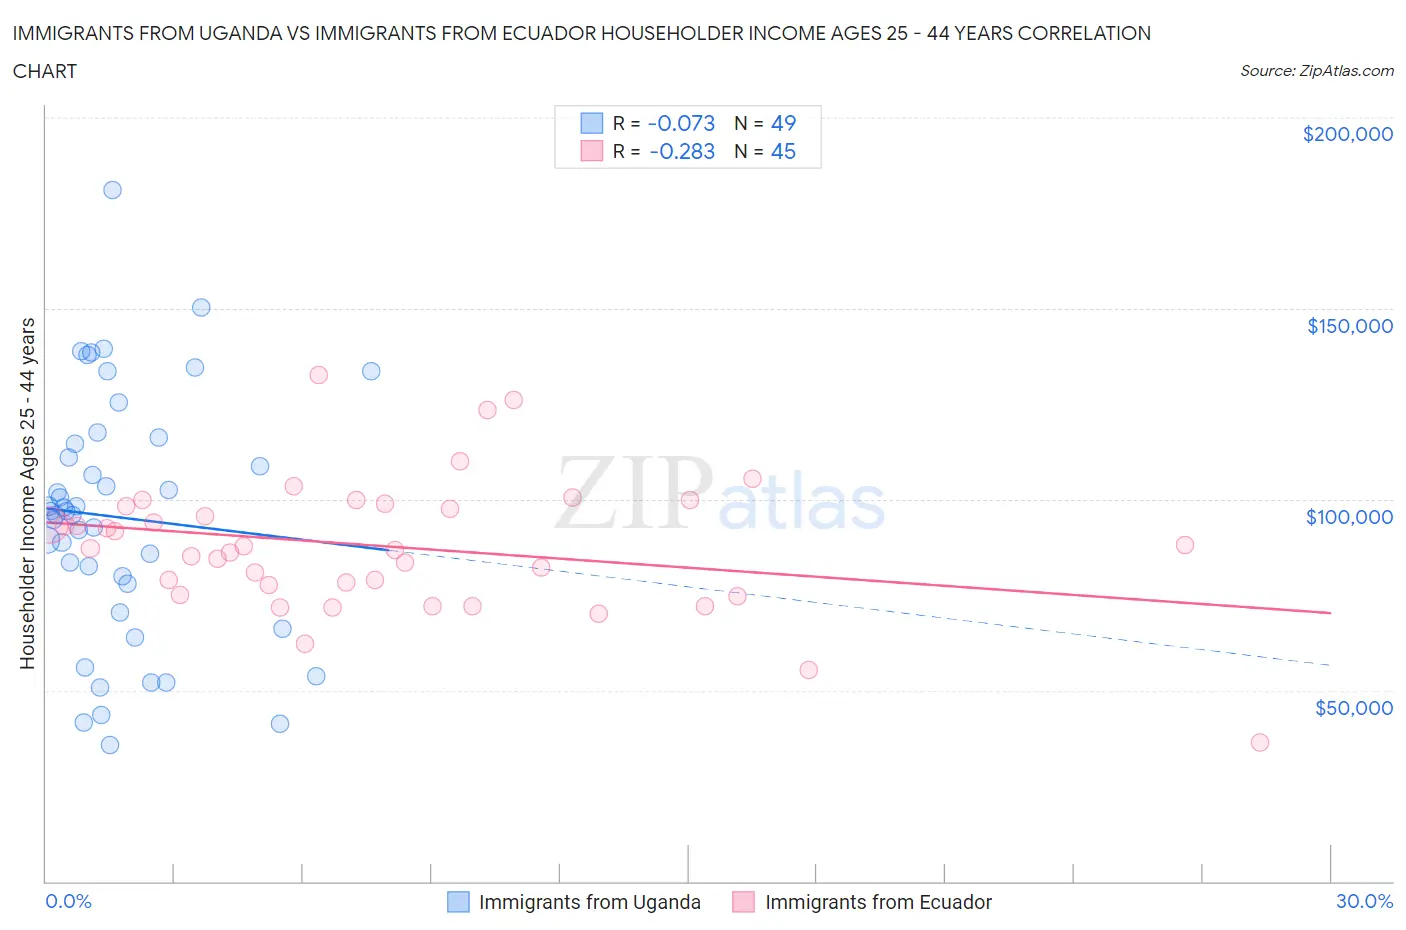 Immigrants from Uganda vs Immigrants from Ecuador Householder Income Ages 25 - 44 years